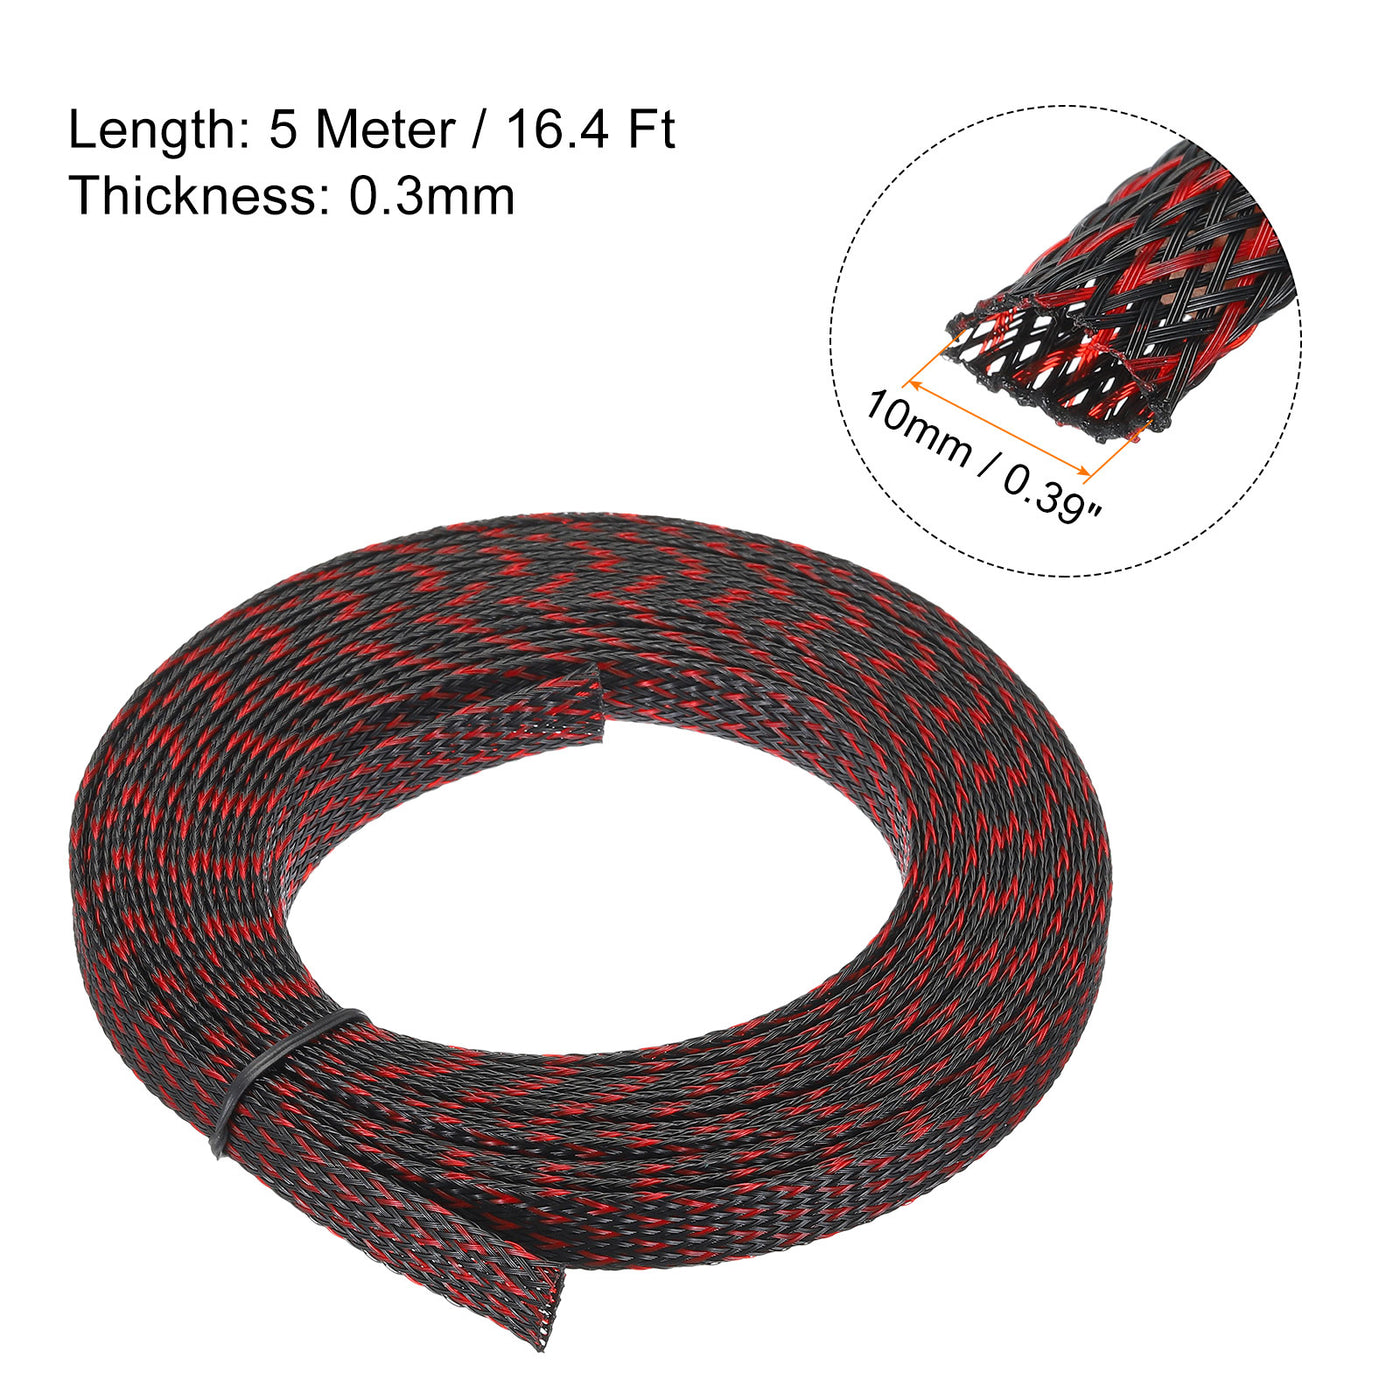 uxcell Uxcell Insulation Braid Sleeving, 16.4Ft-10mm High Temperature Sleeve Black Red